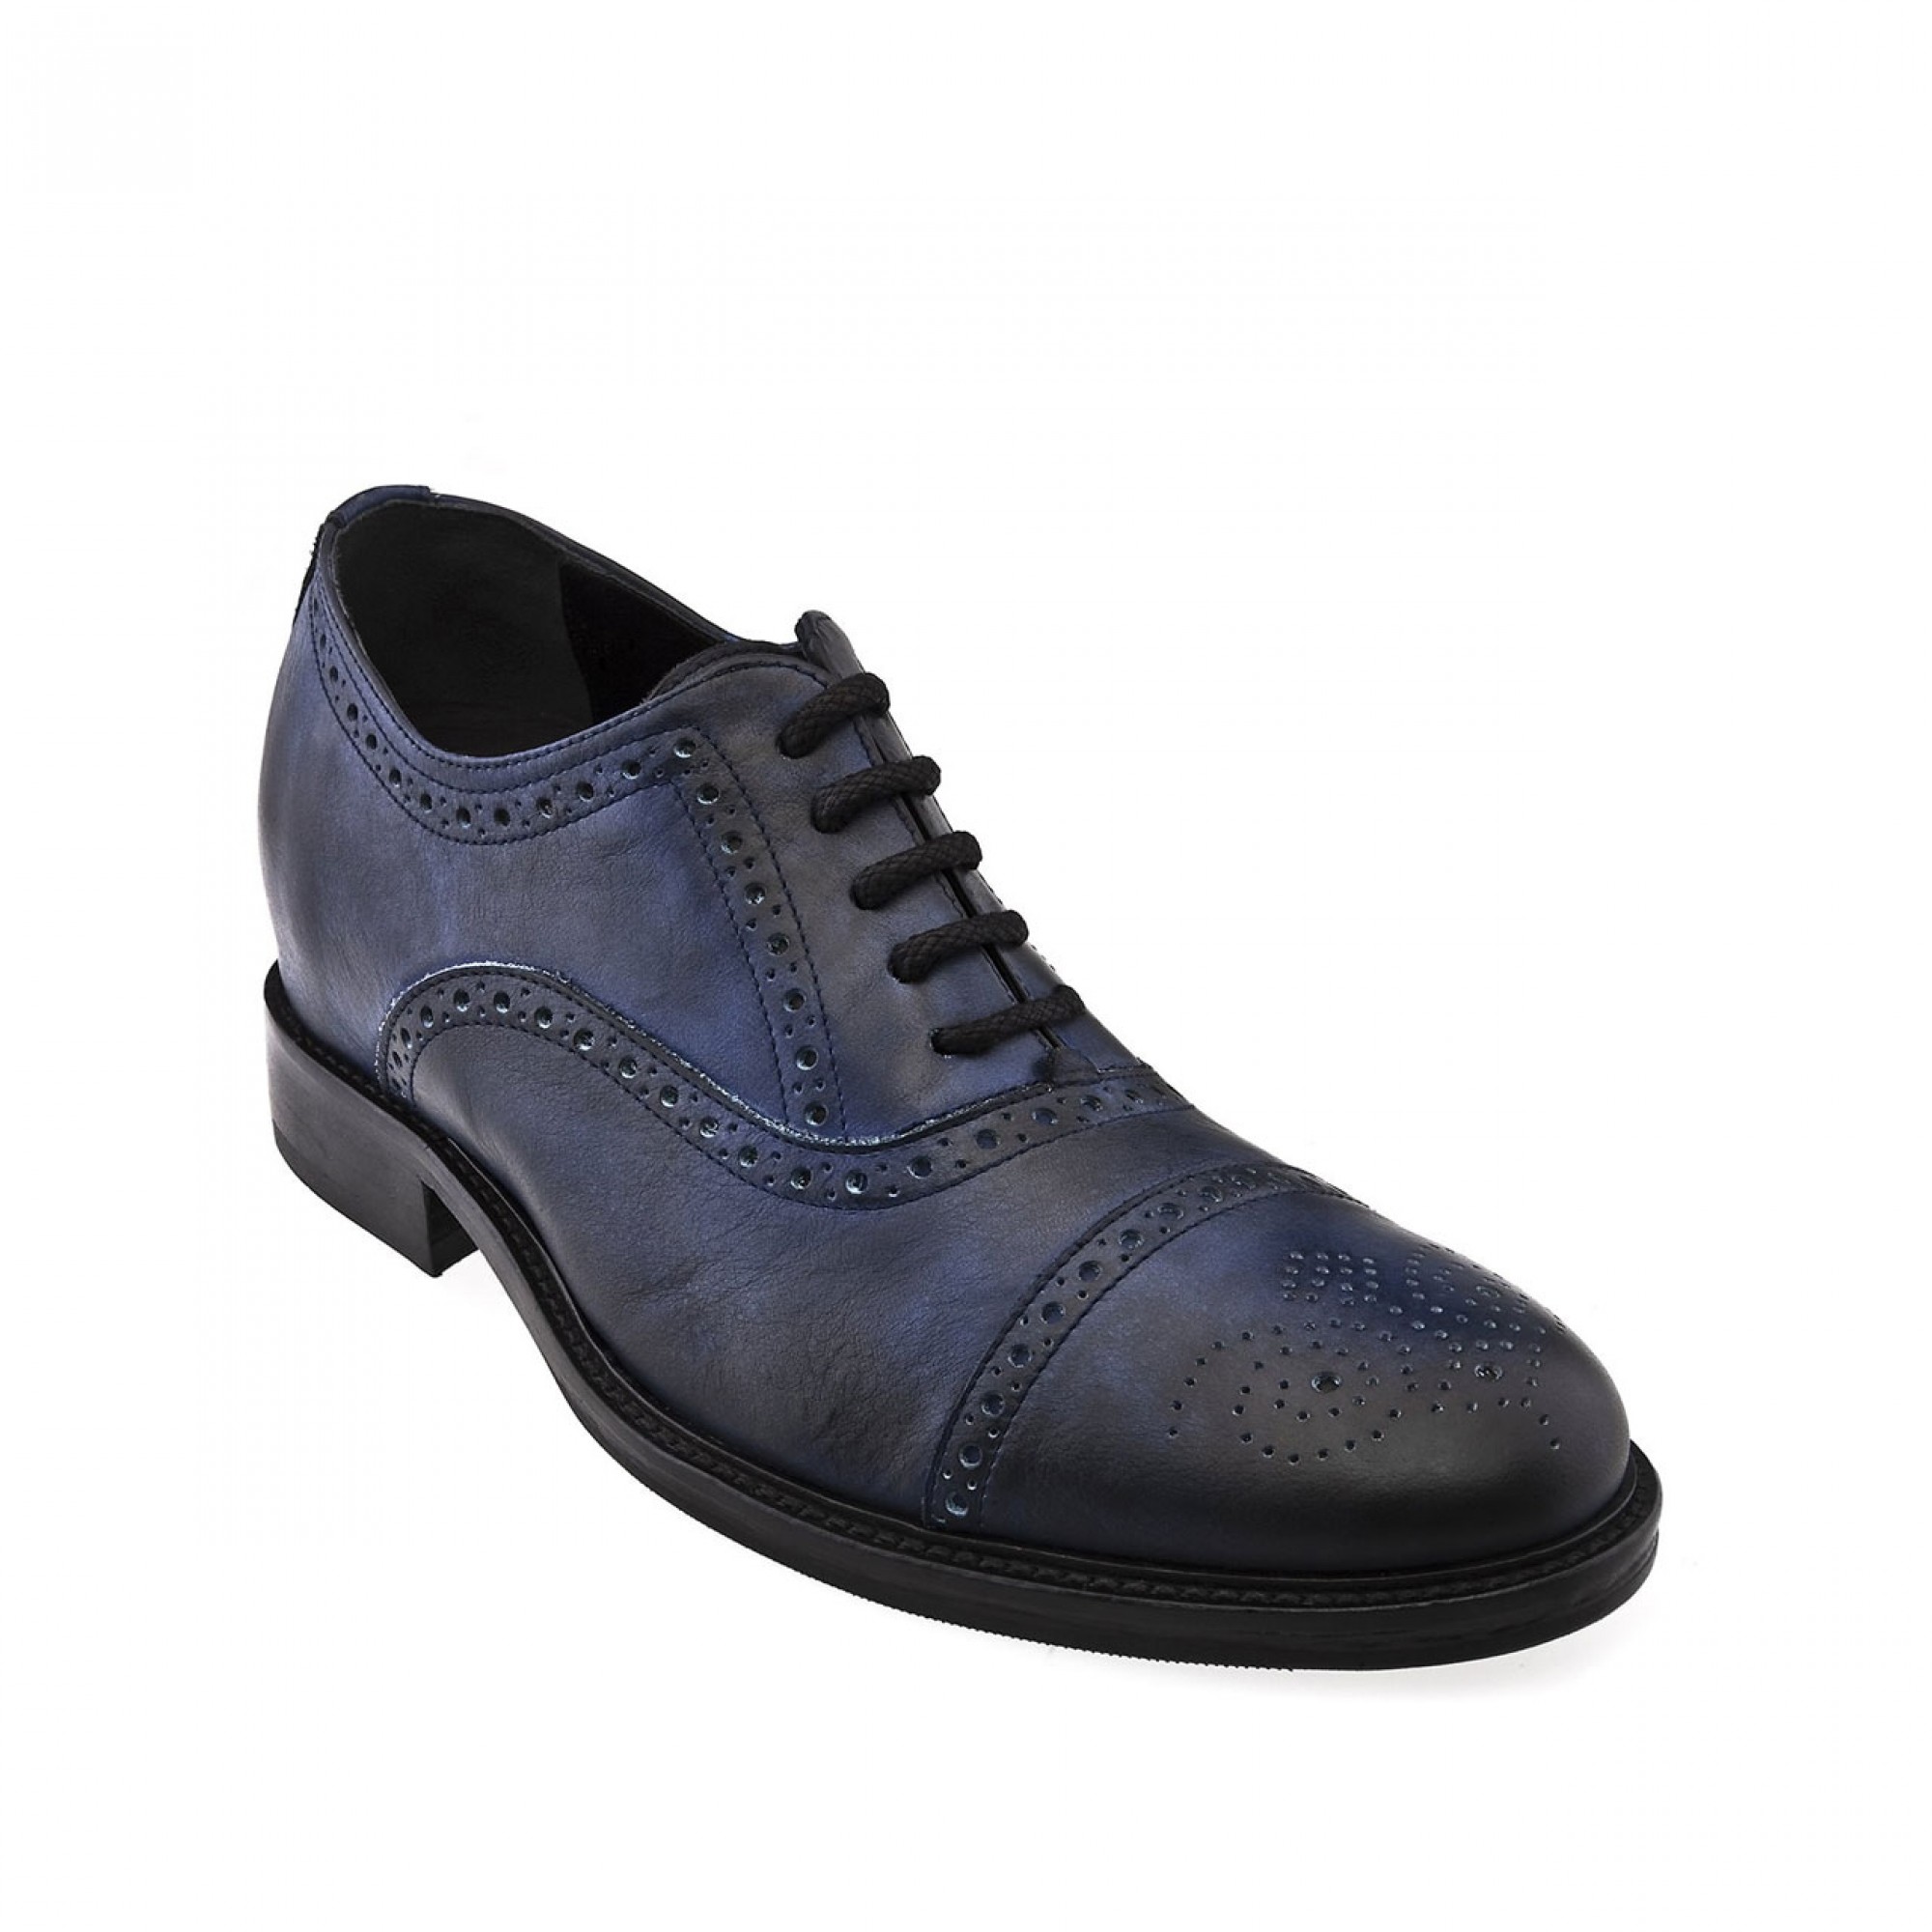 Catania - Elevator Shoes in Full Grain Leather from 2.4 to 3.1 inches